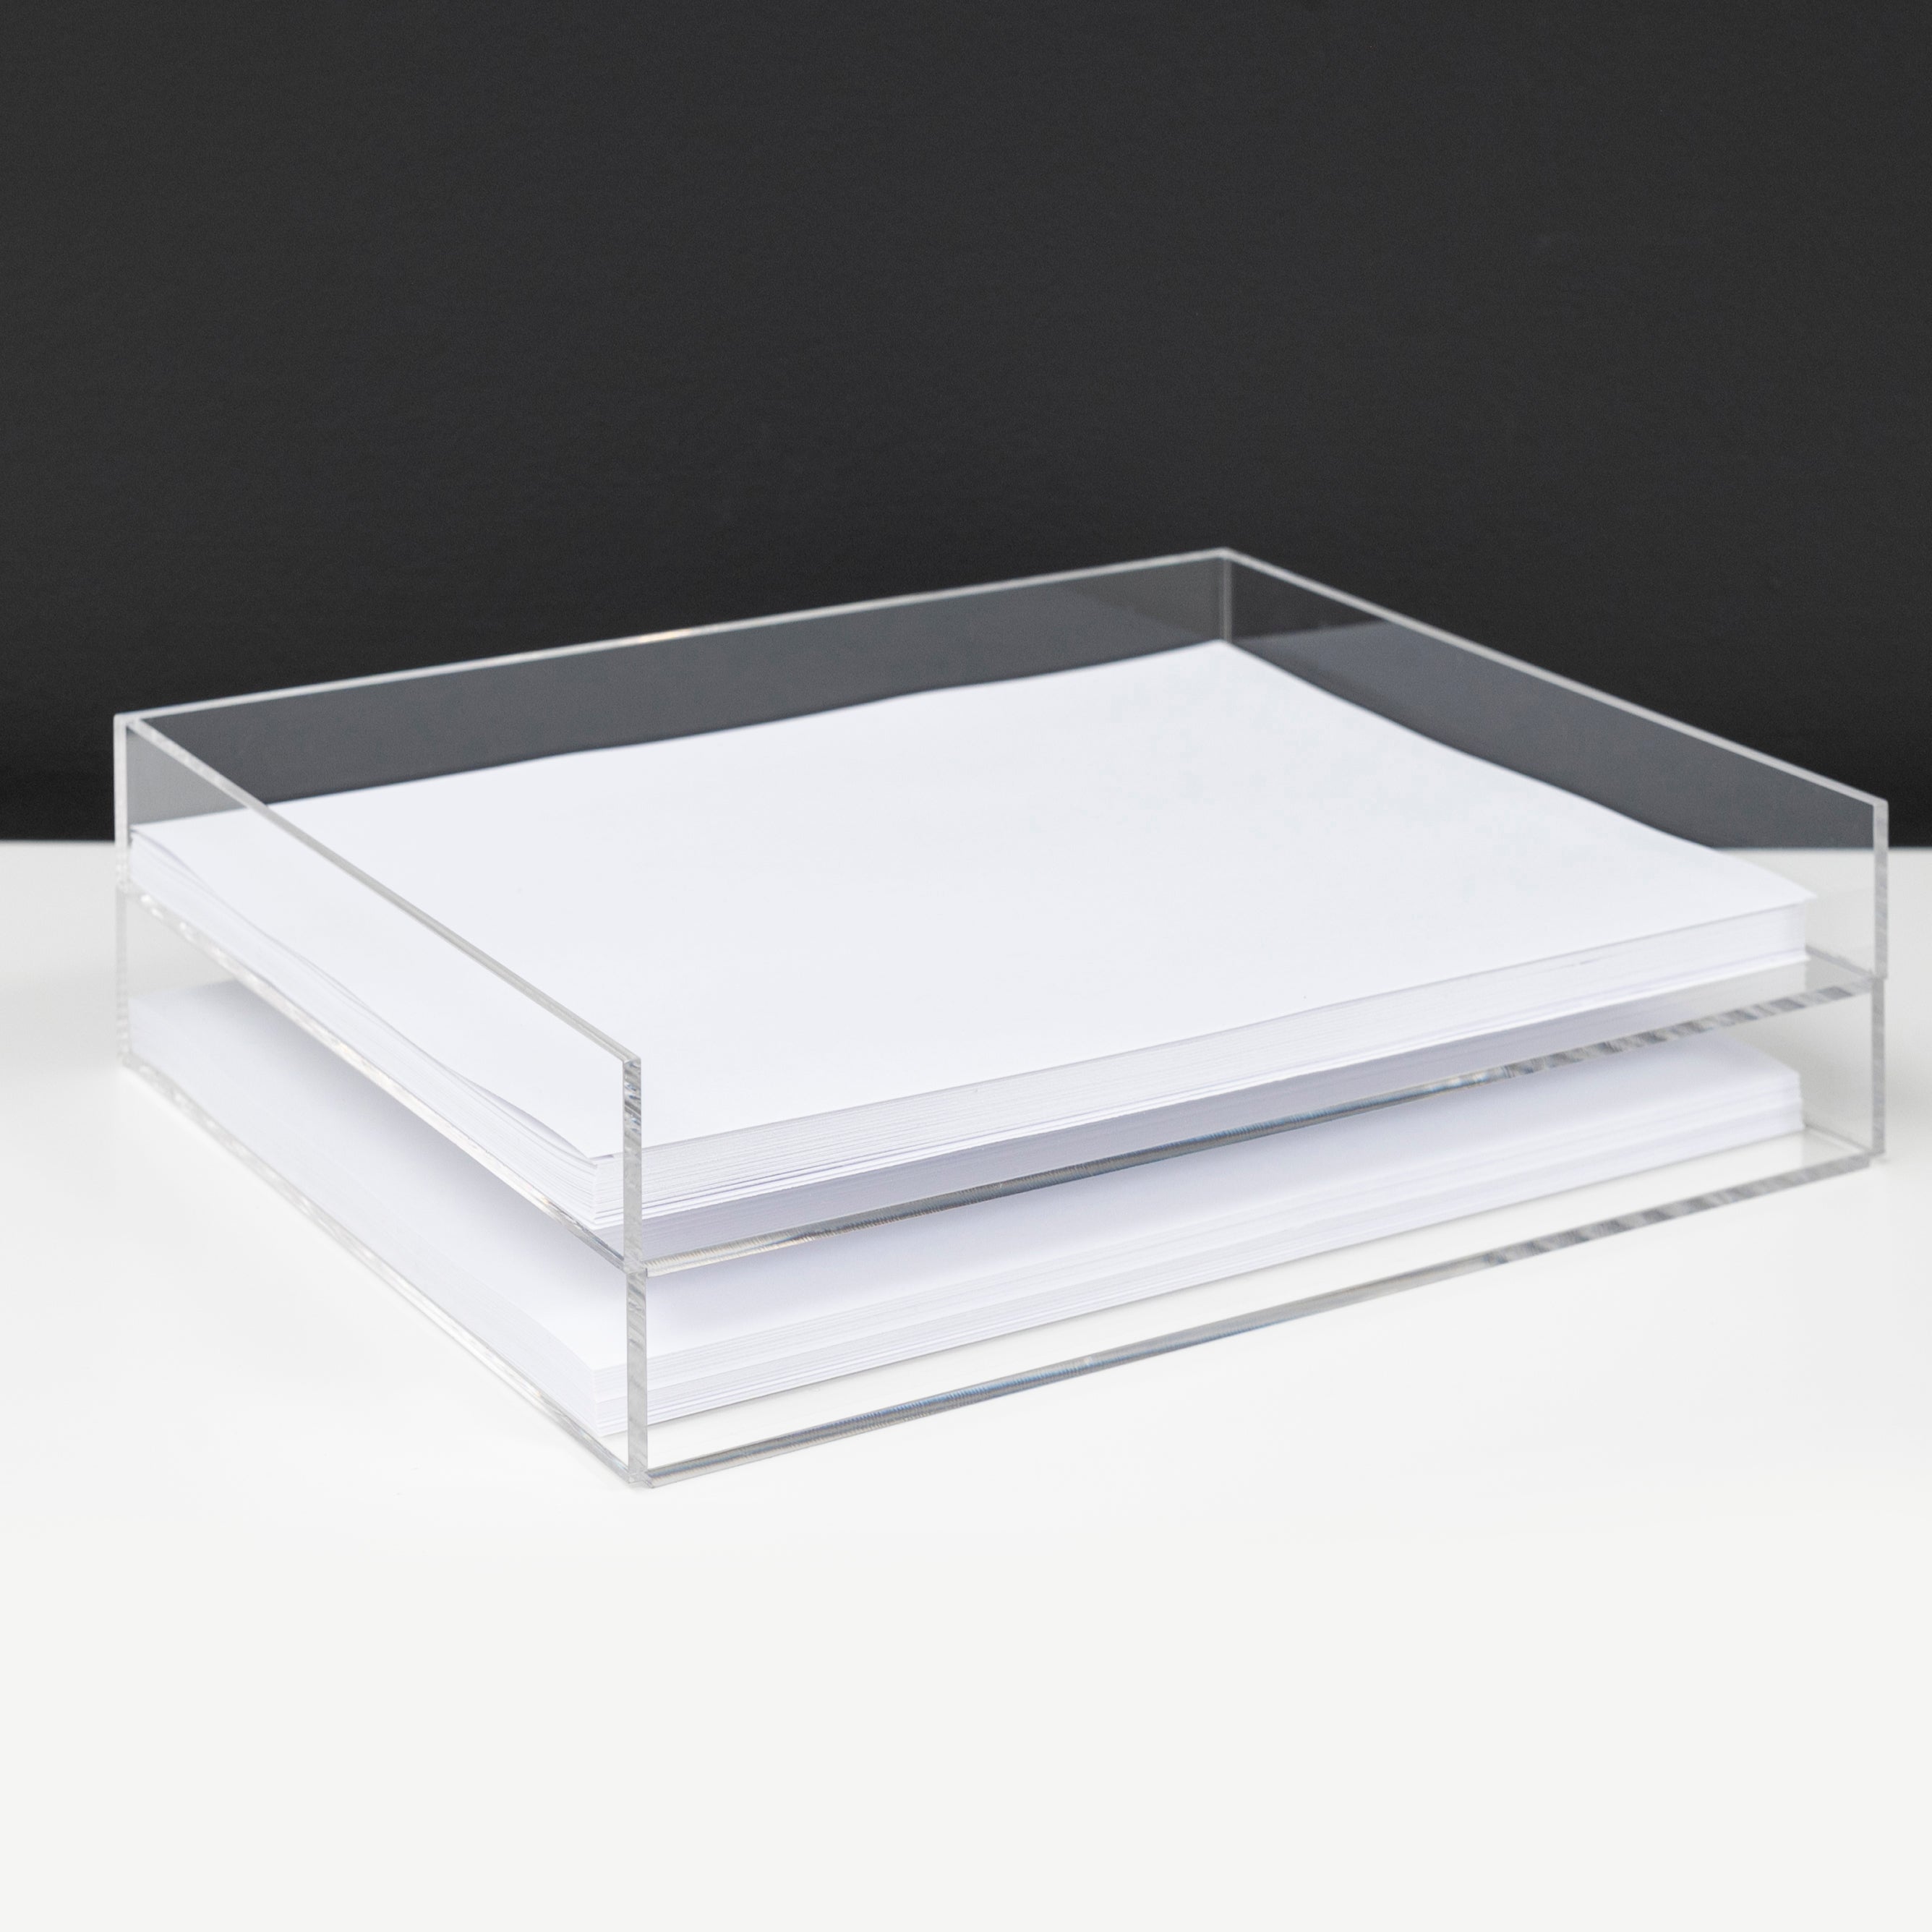 clear stackable paper tray made of acrylic 